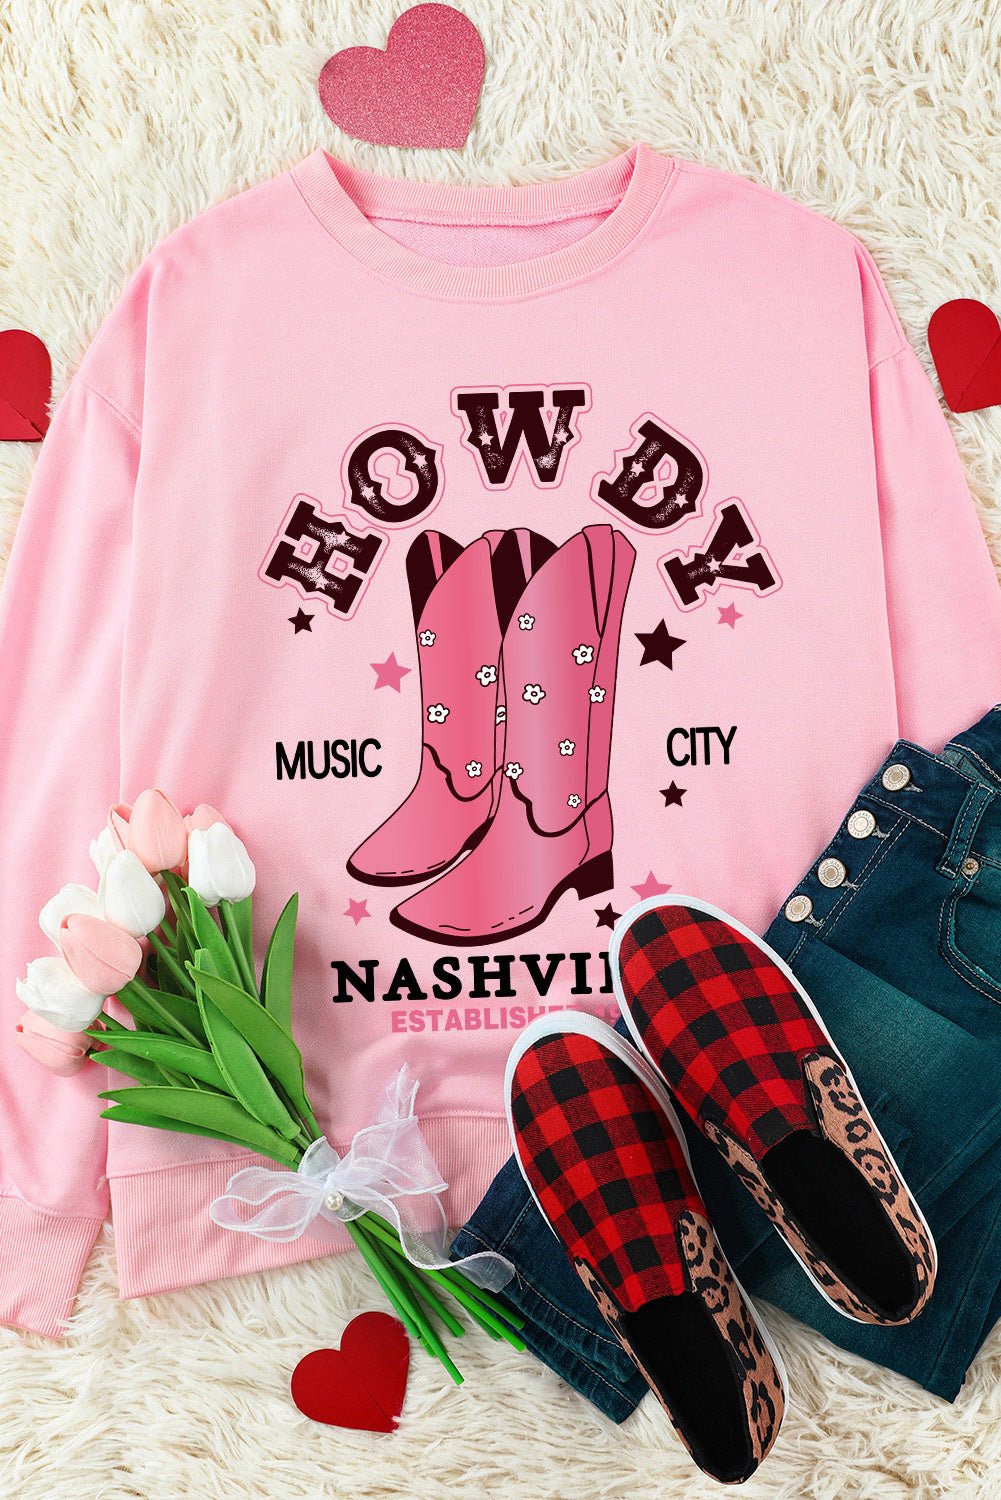 Cowboy Boots Graphic Dropped Shoulder Sweatshirt - Follow the Trail of Adventure with Whimsical Fashion - Embrace Warmth and Comfort. - Guy Christopher